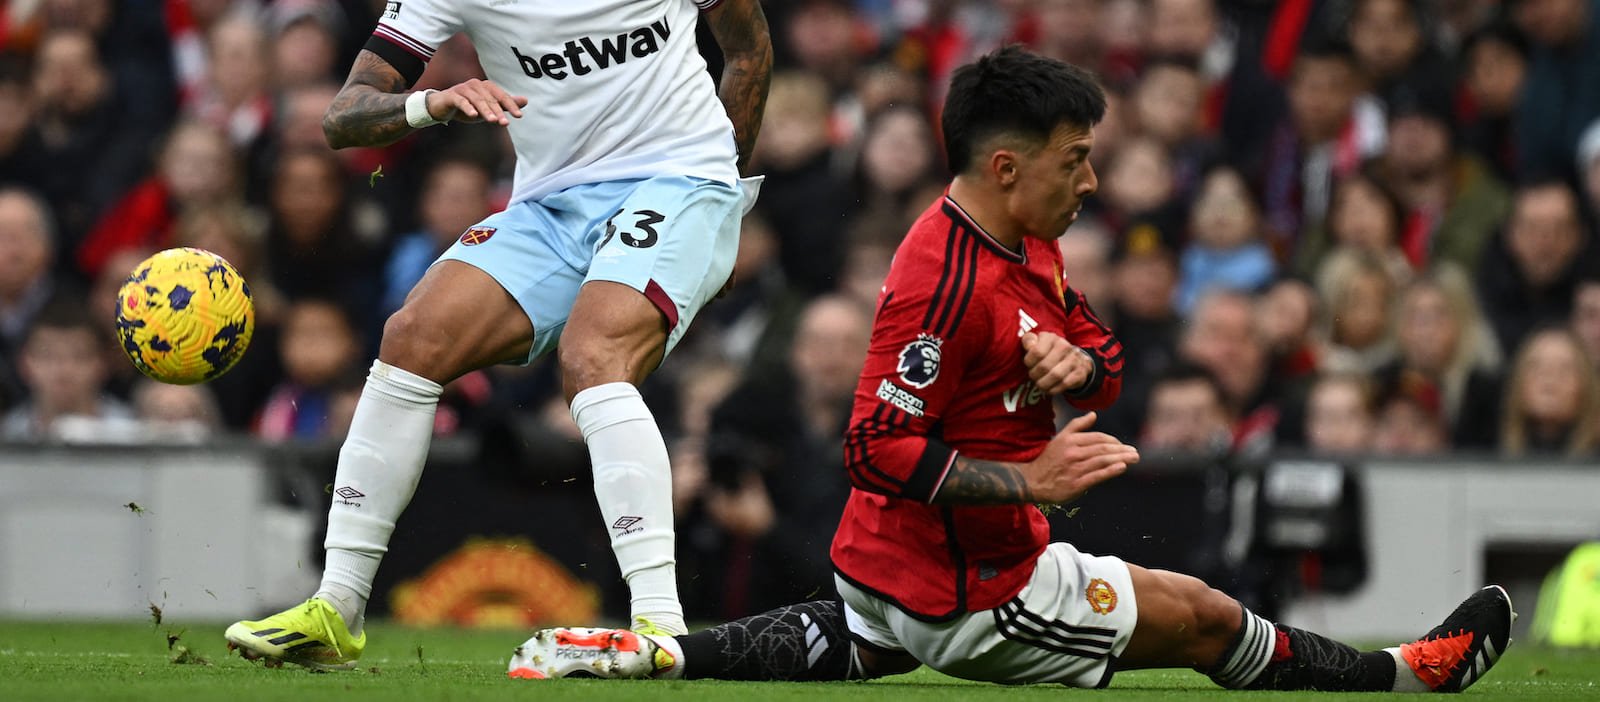 “I’ll soon be back out there”: Lisandro Martinez reacts after confirmation of devastating injury verdict – Man United News And Transfer News